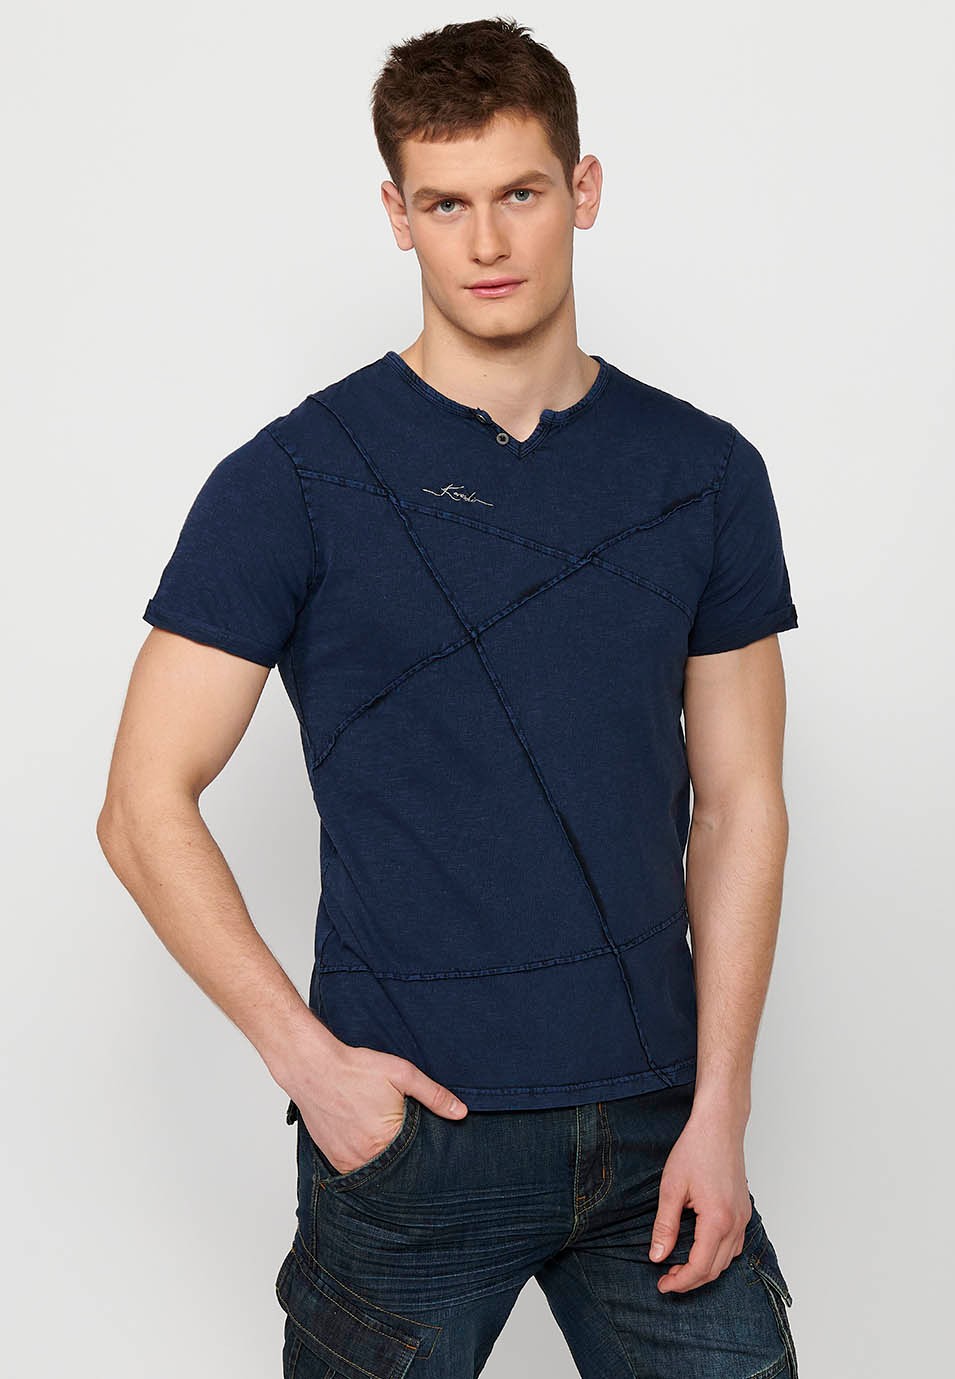 Short sleeve t-shirt, round neck with opening, blue color for men